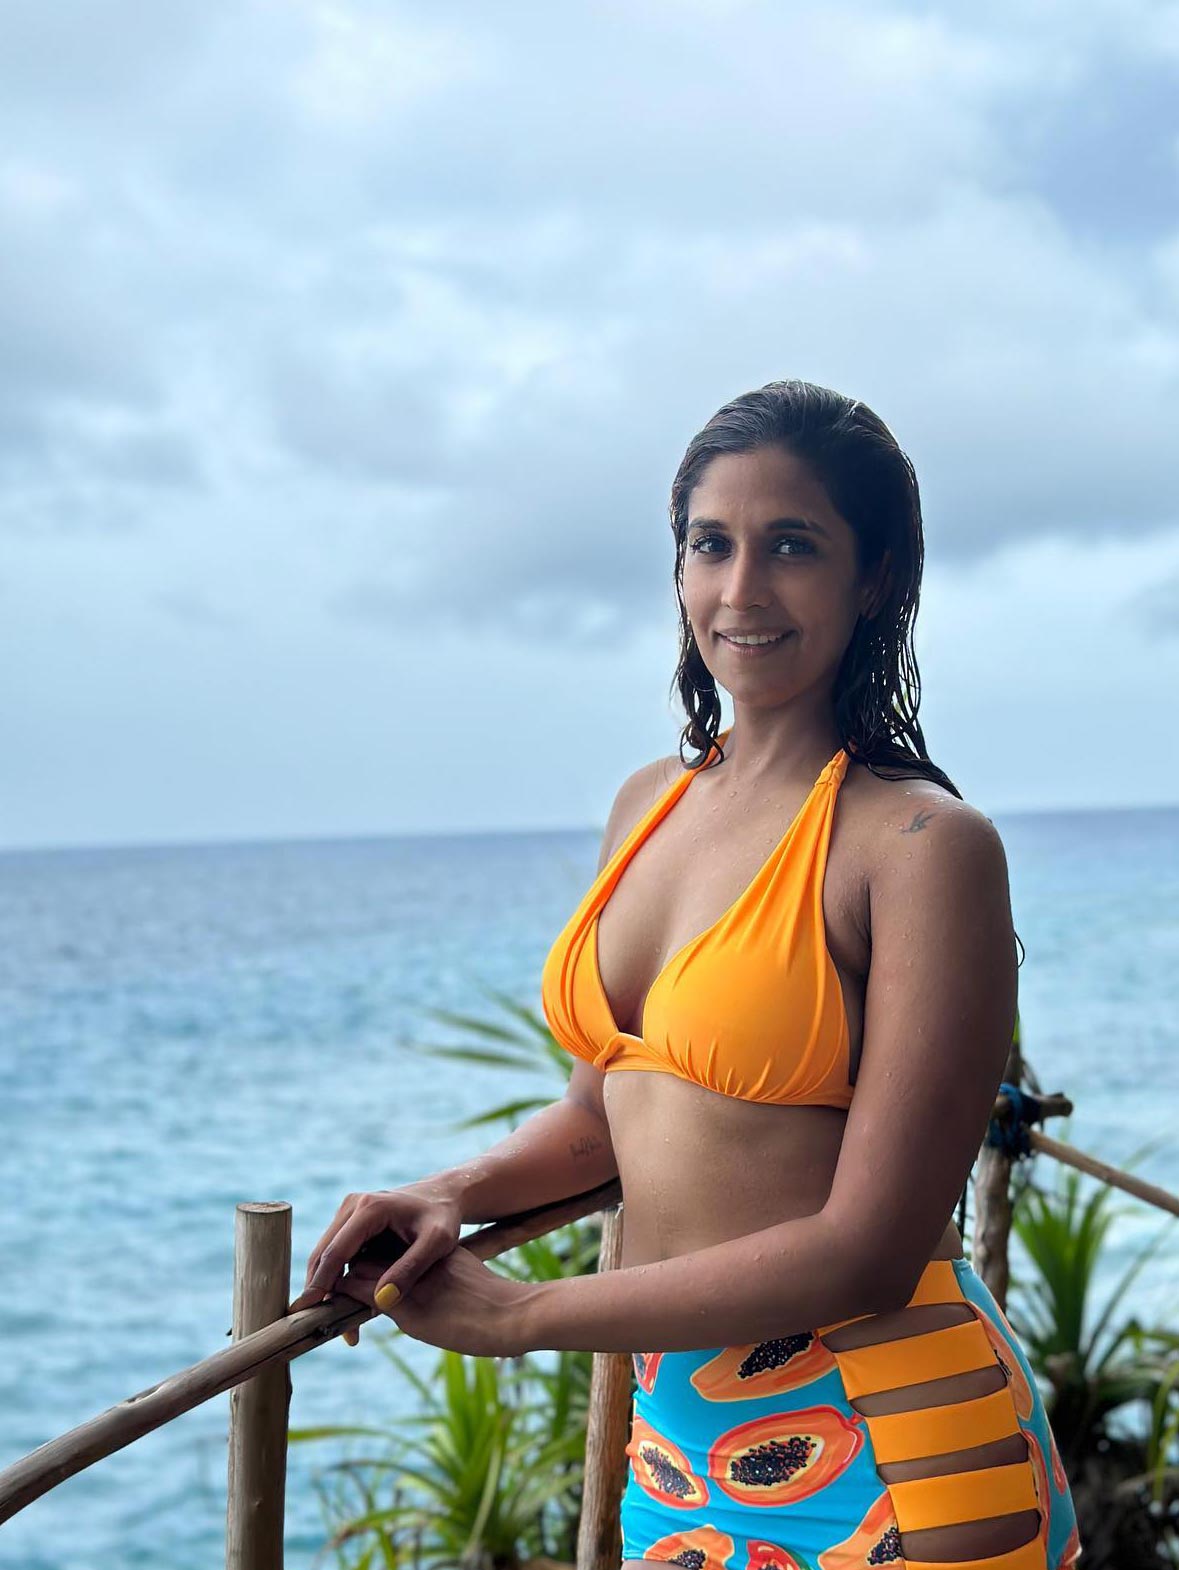 Jyoti Sethi Xxx Video - Harleen Sethi in this yellow bikini showing ample cleavage made fans drop  their jaws - see now.